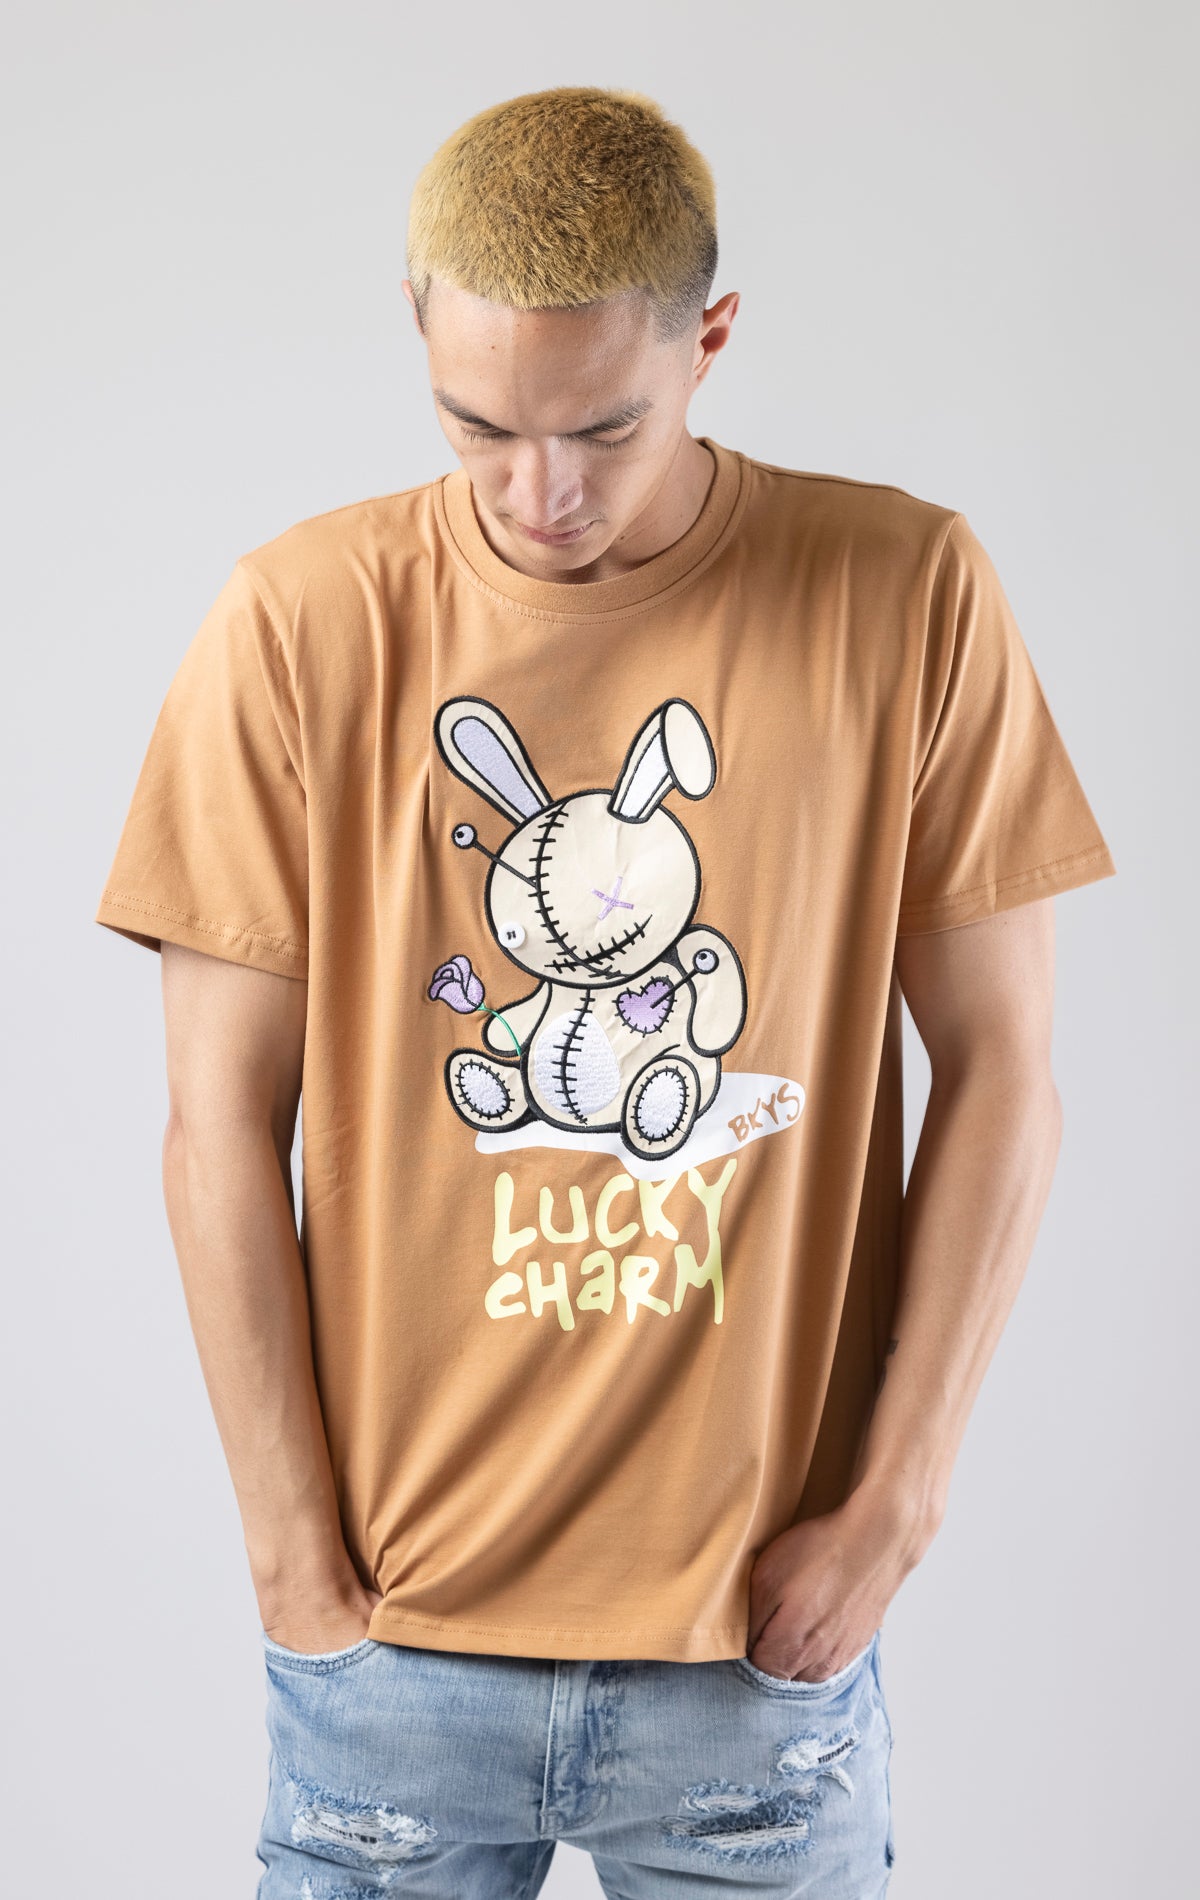 Wheat Crewneck, short-sleeve BKYS Lucky Charm t-shirt with bunny graphic on front